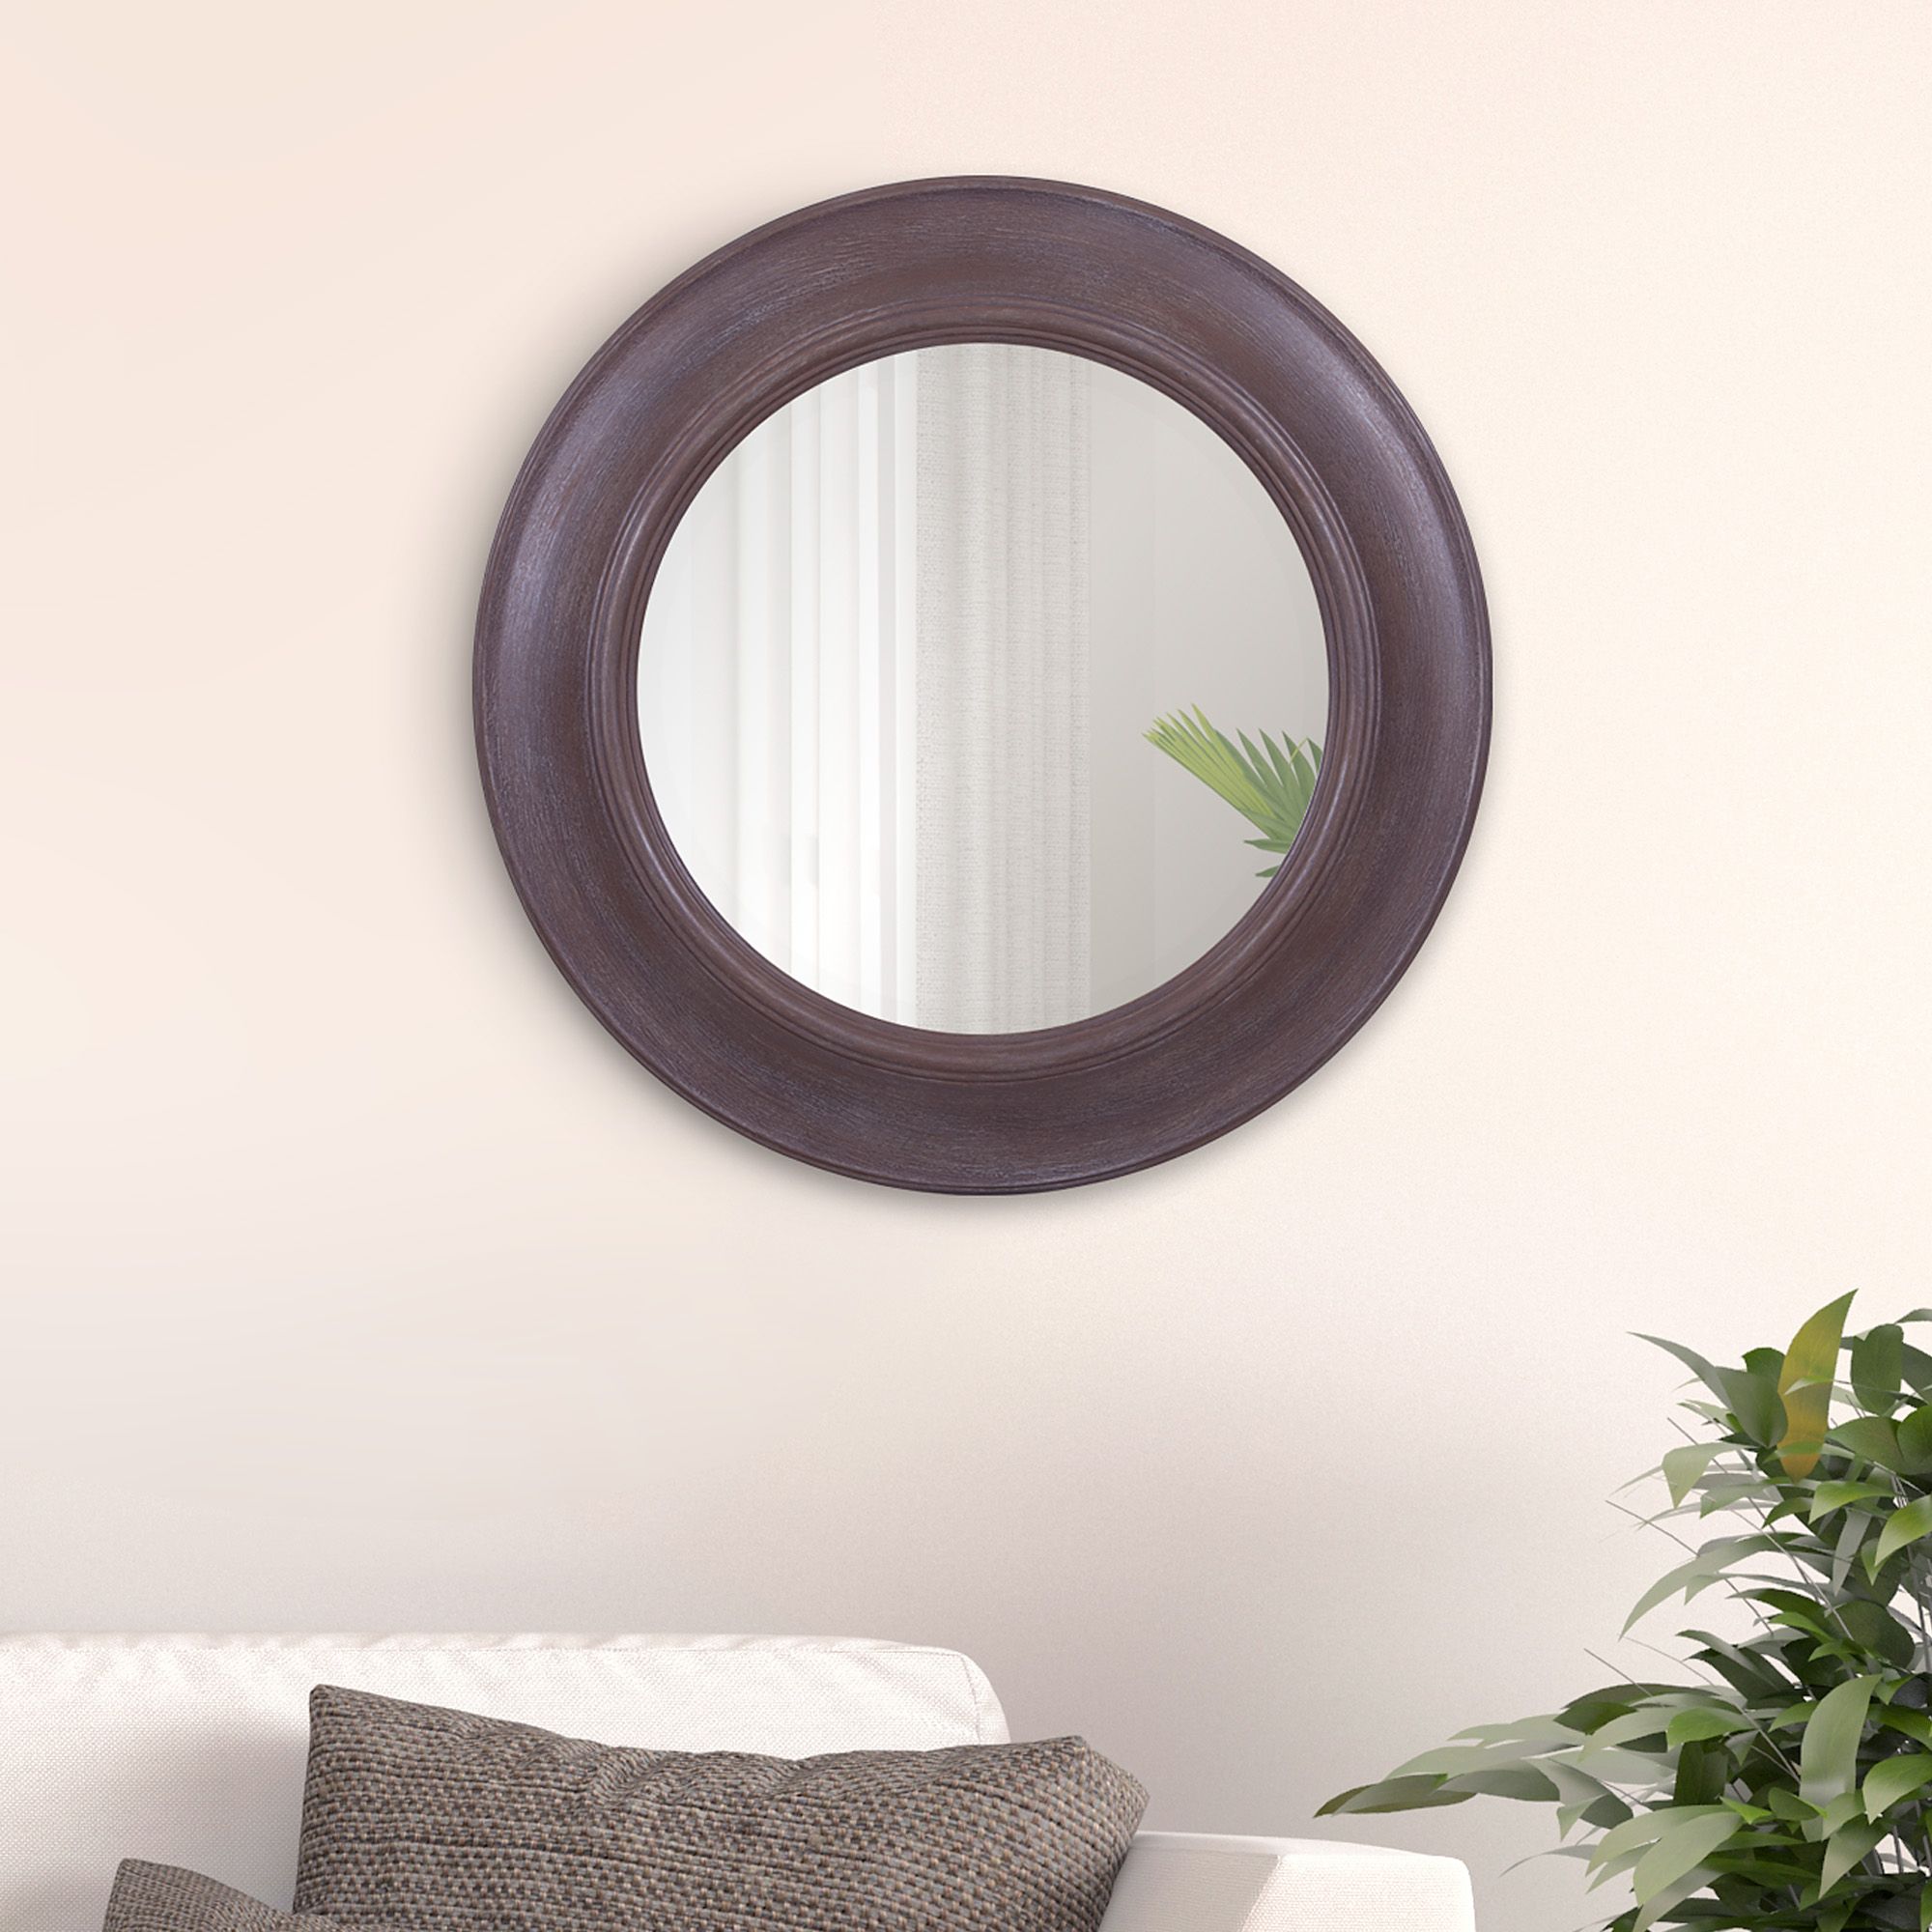 Rustic Round Mirror In Distressed Taupe 24"x24"patton Wall Decor Throughout Distressed Black Round Wall Mirrors (View 2 of 15)